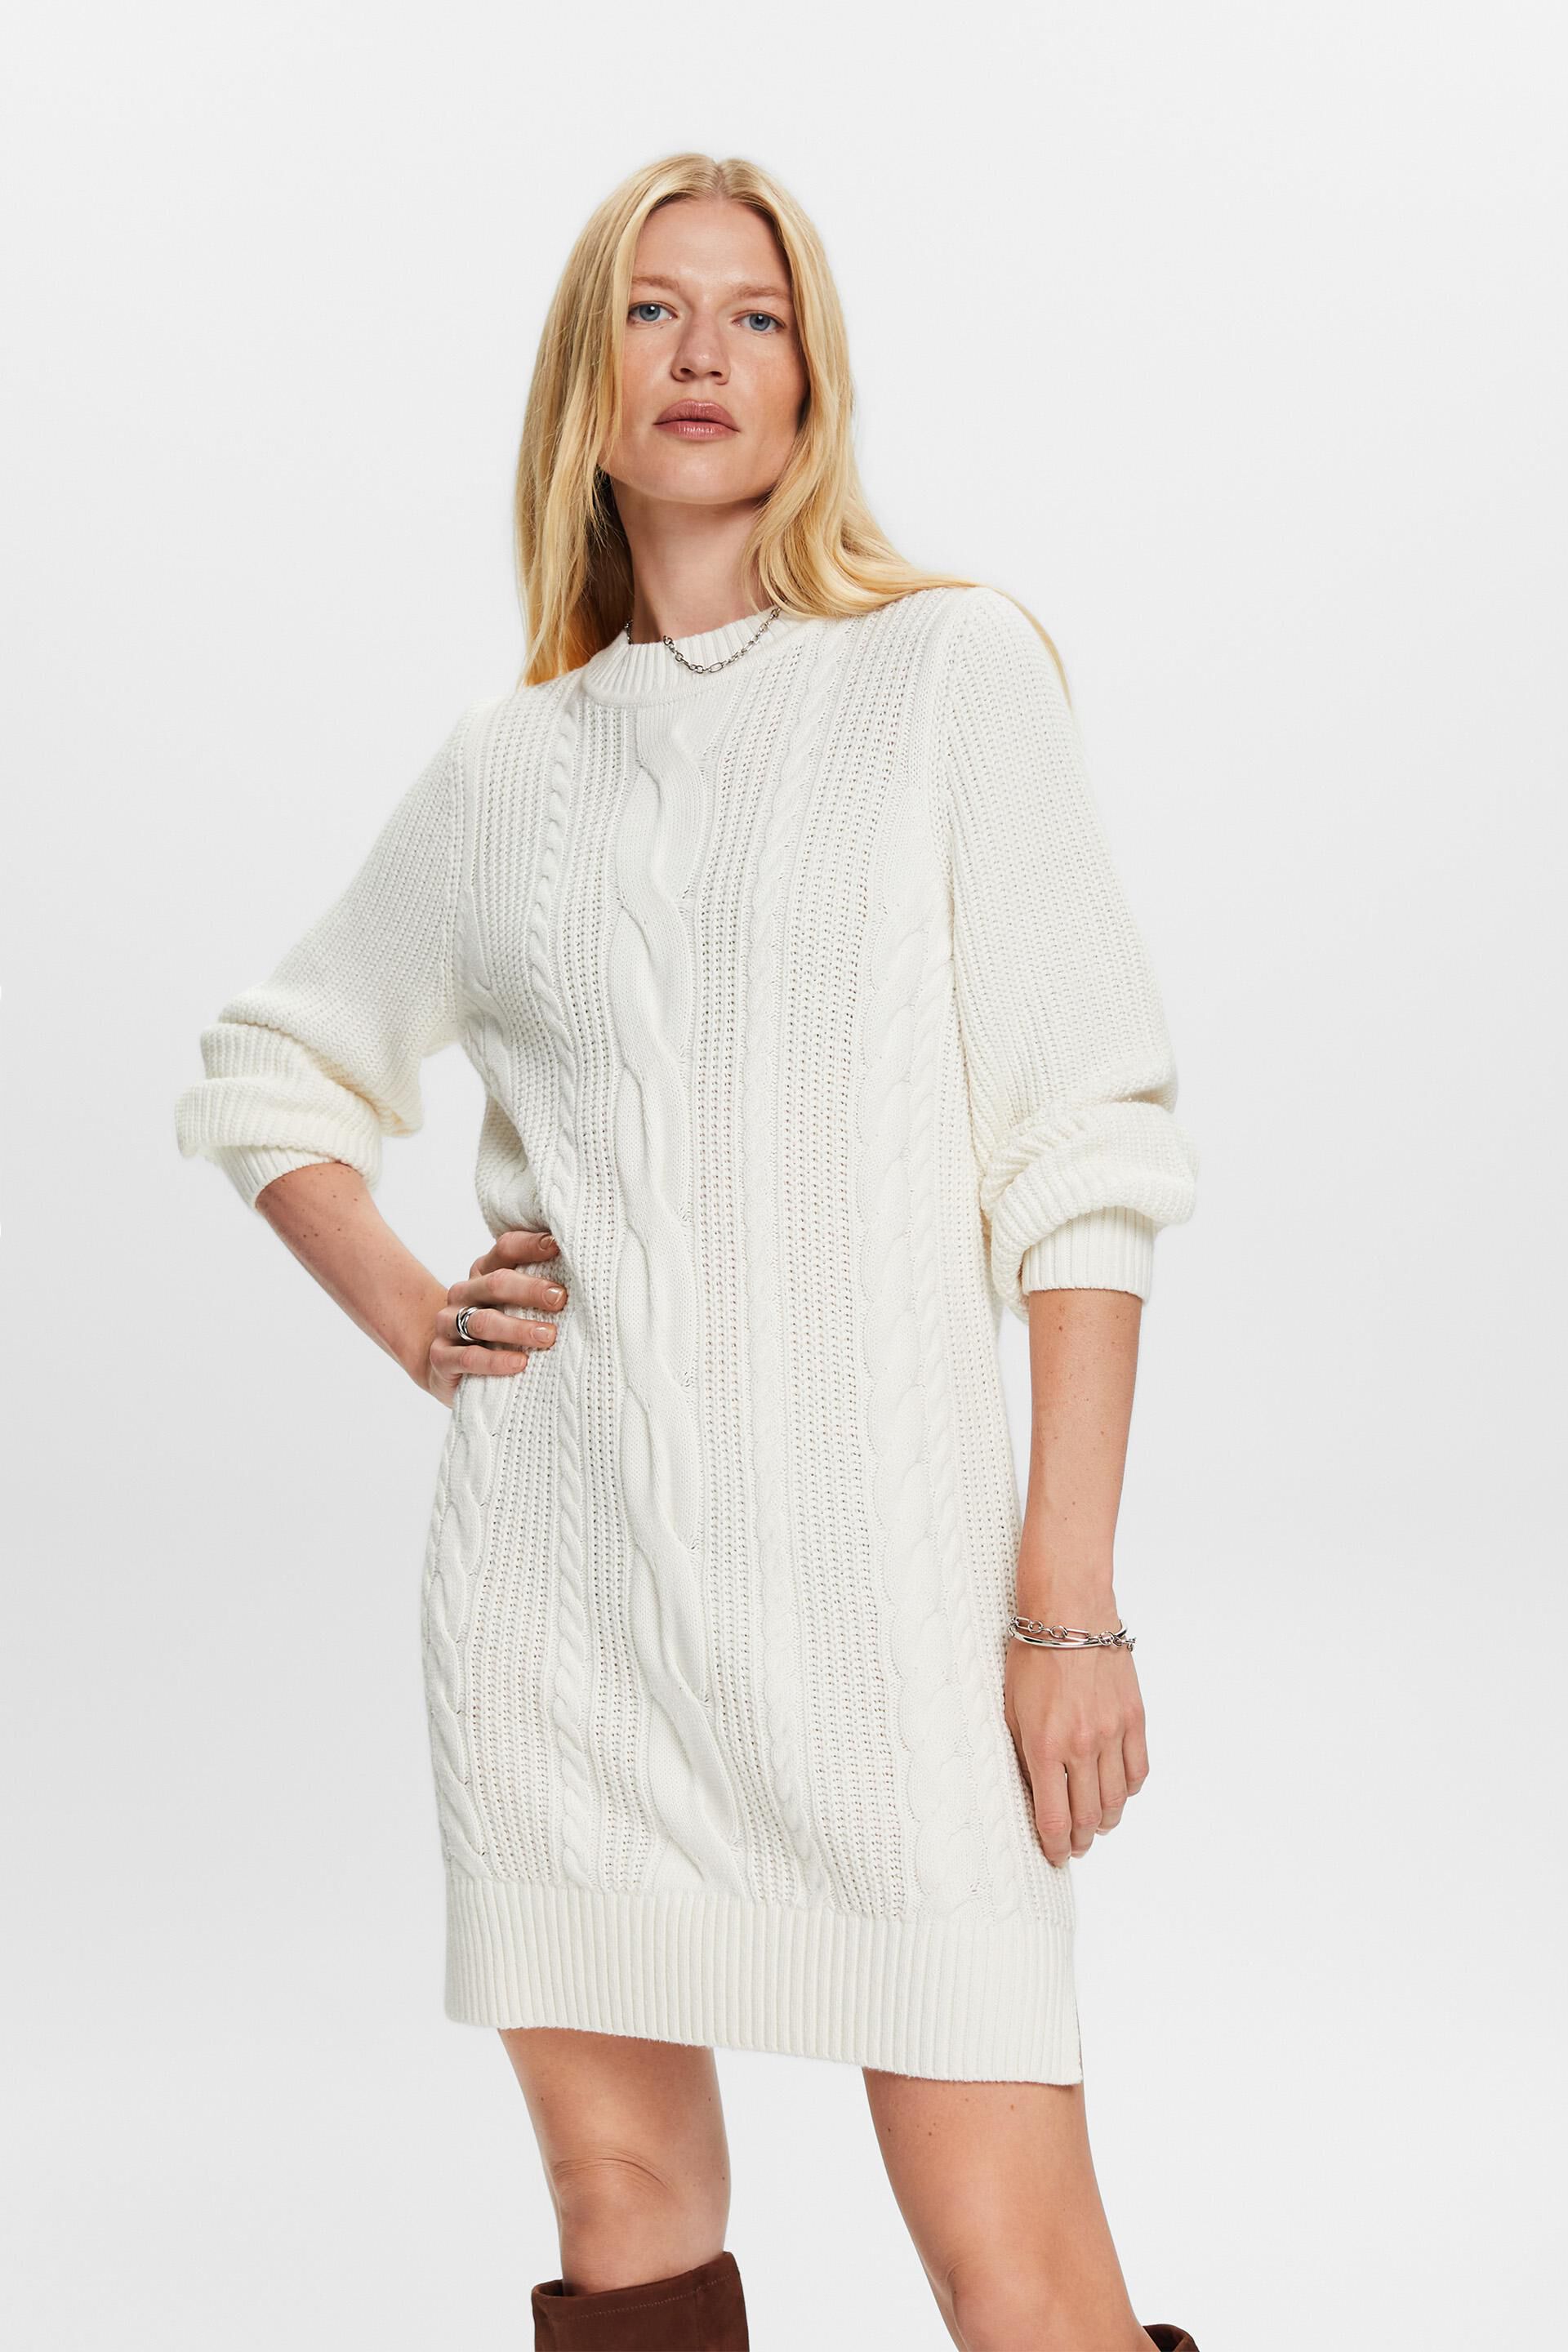 Esprit Dress Cable Sweater Wool-Blend Knit